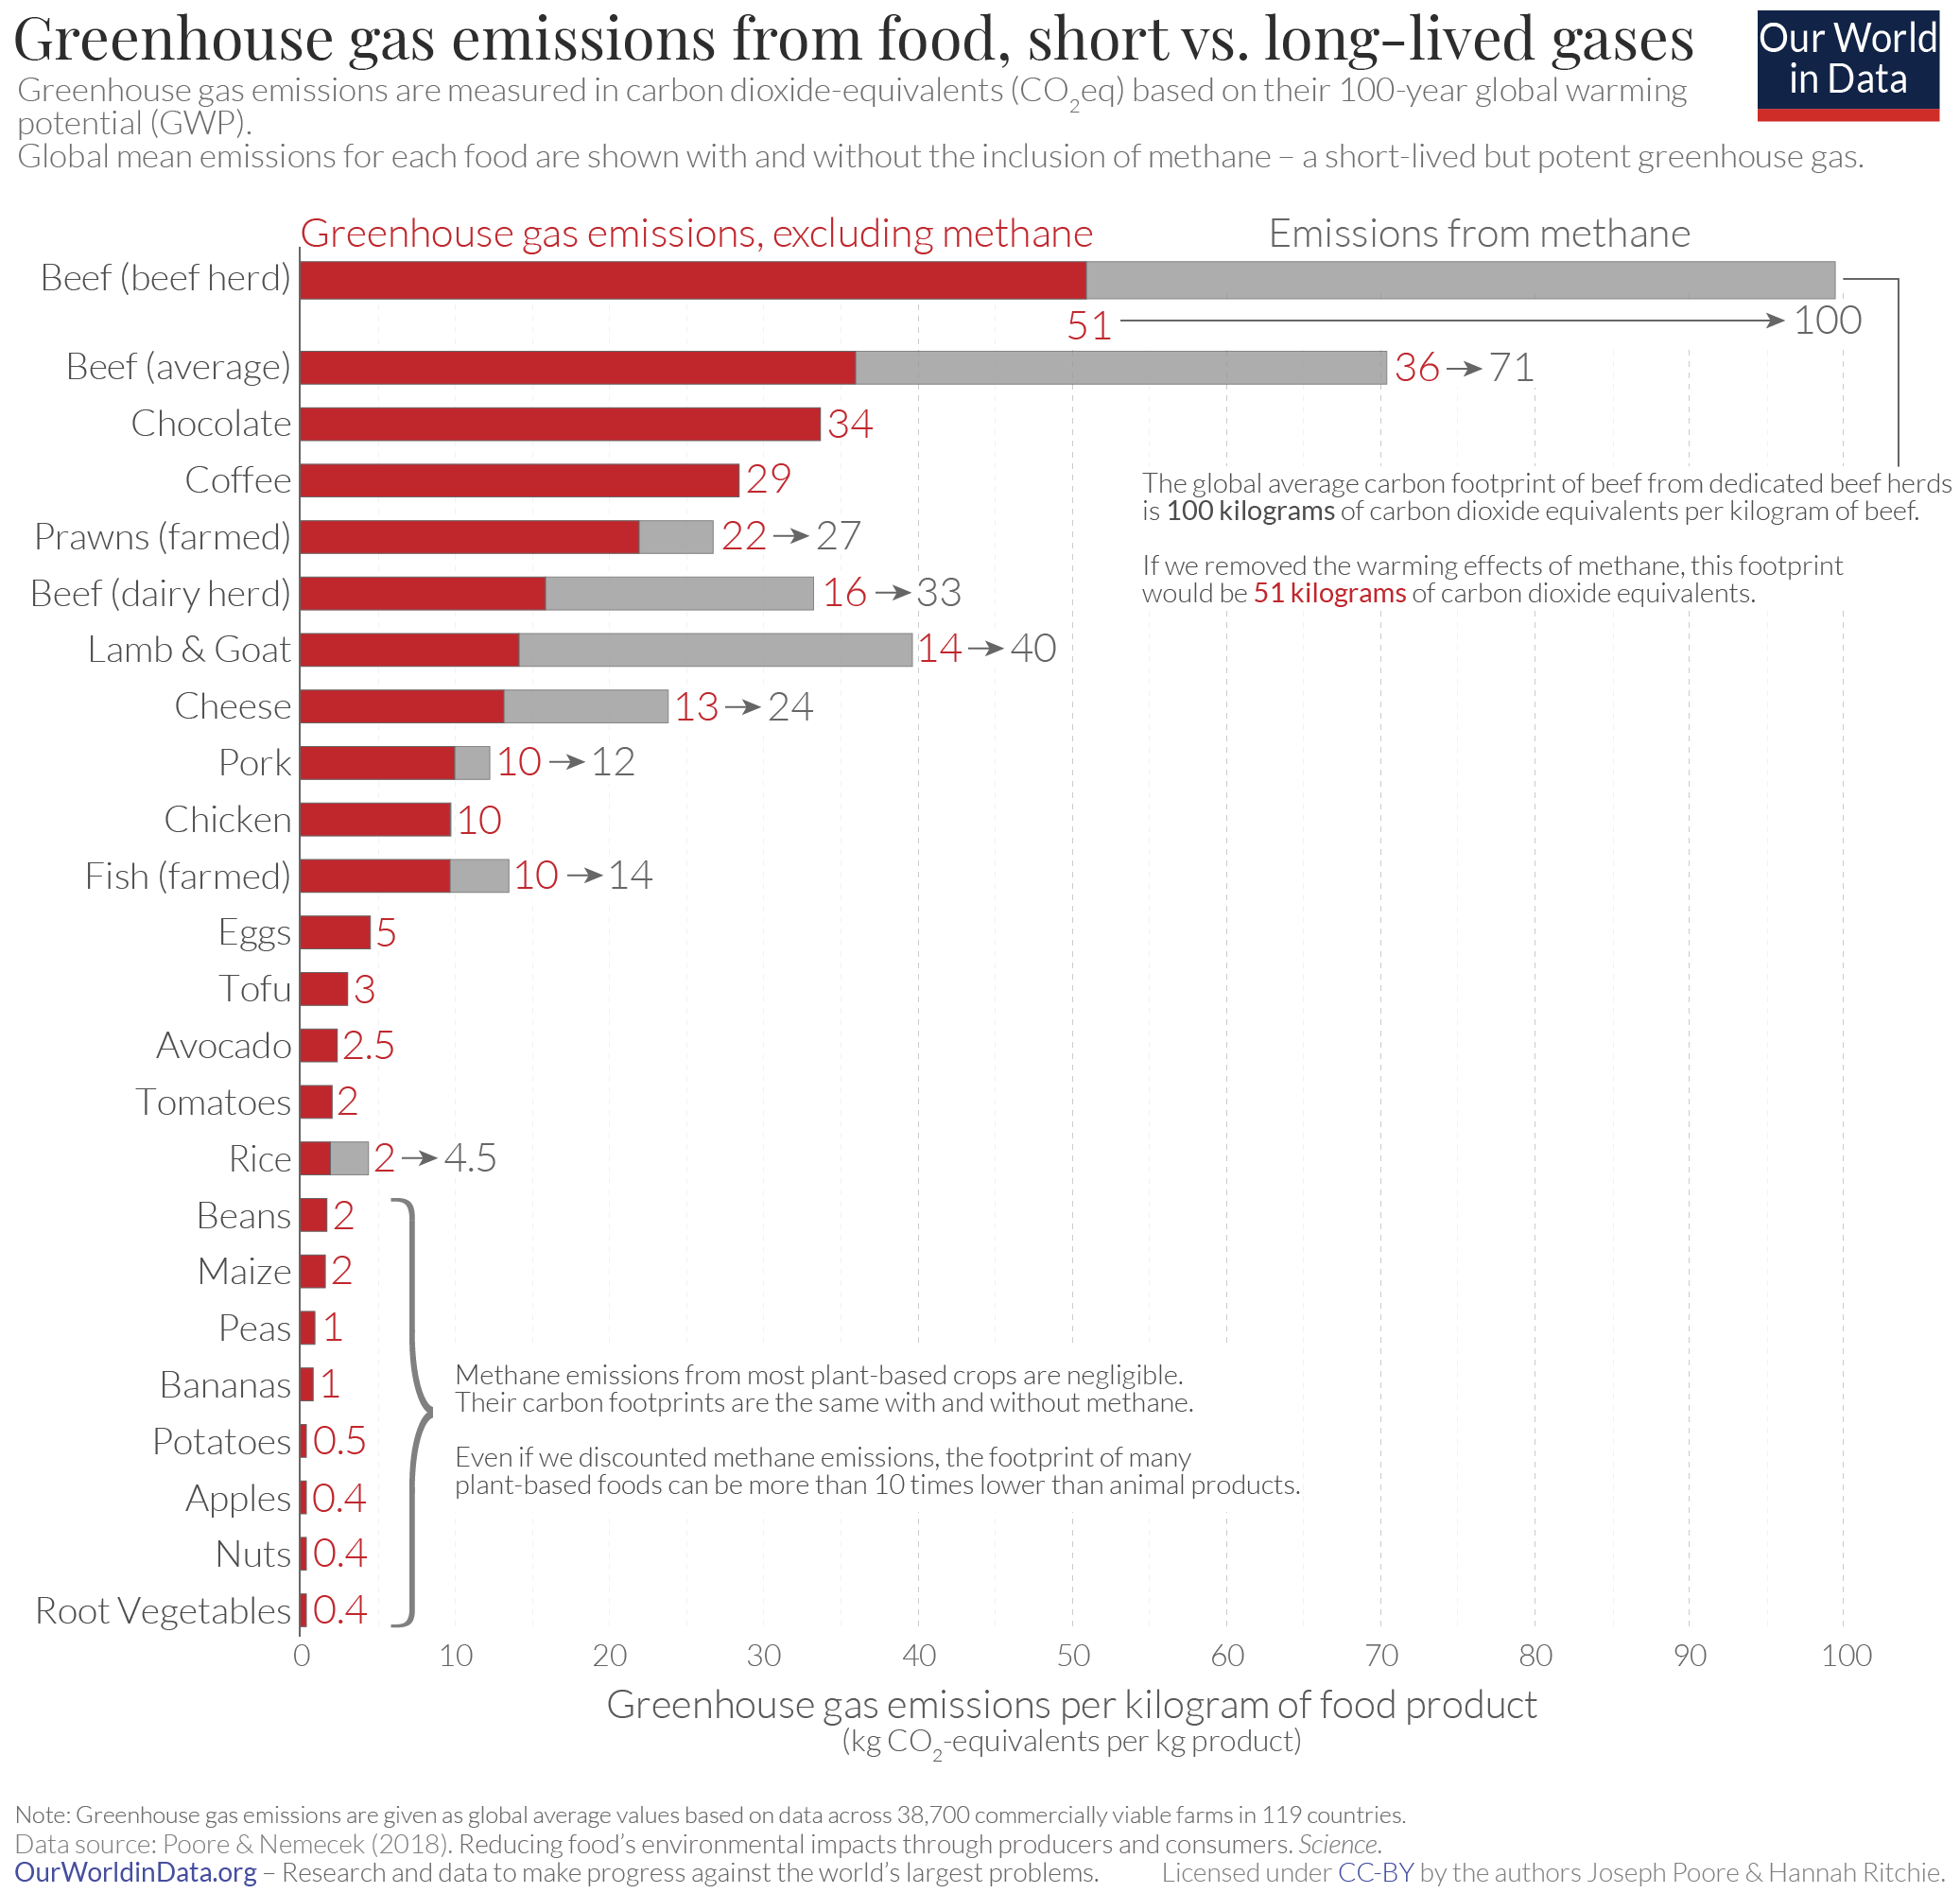 The carbon footprint of foods: are differences explained by the impacts of methane?